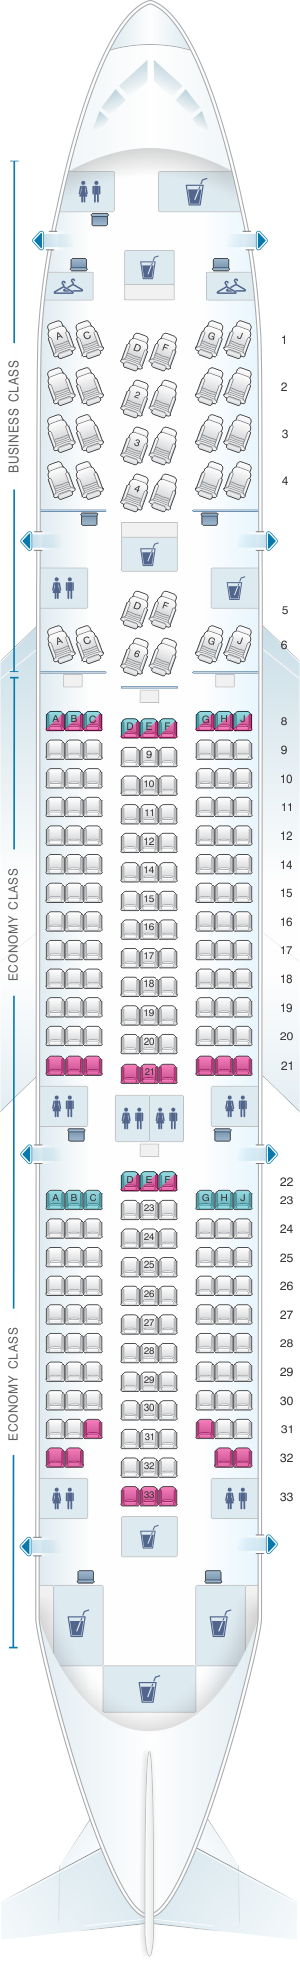 Seat map for Aeromexico Boeing B787-8